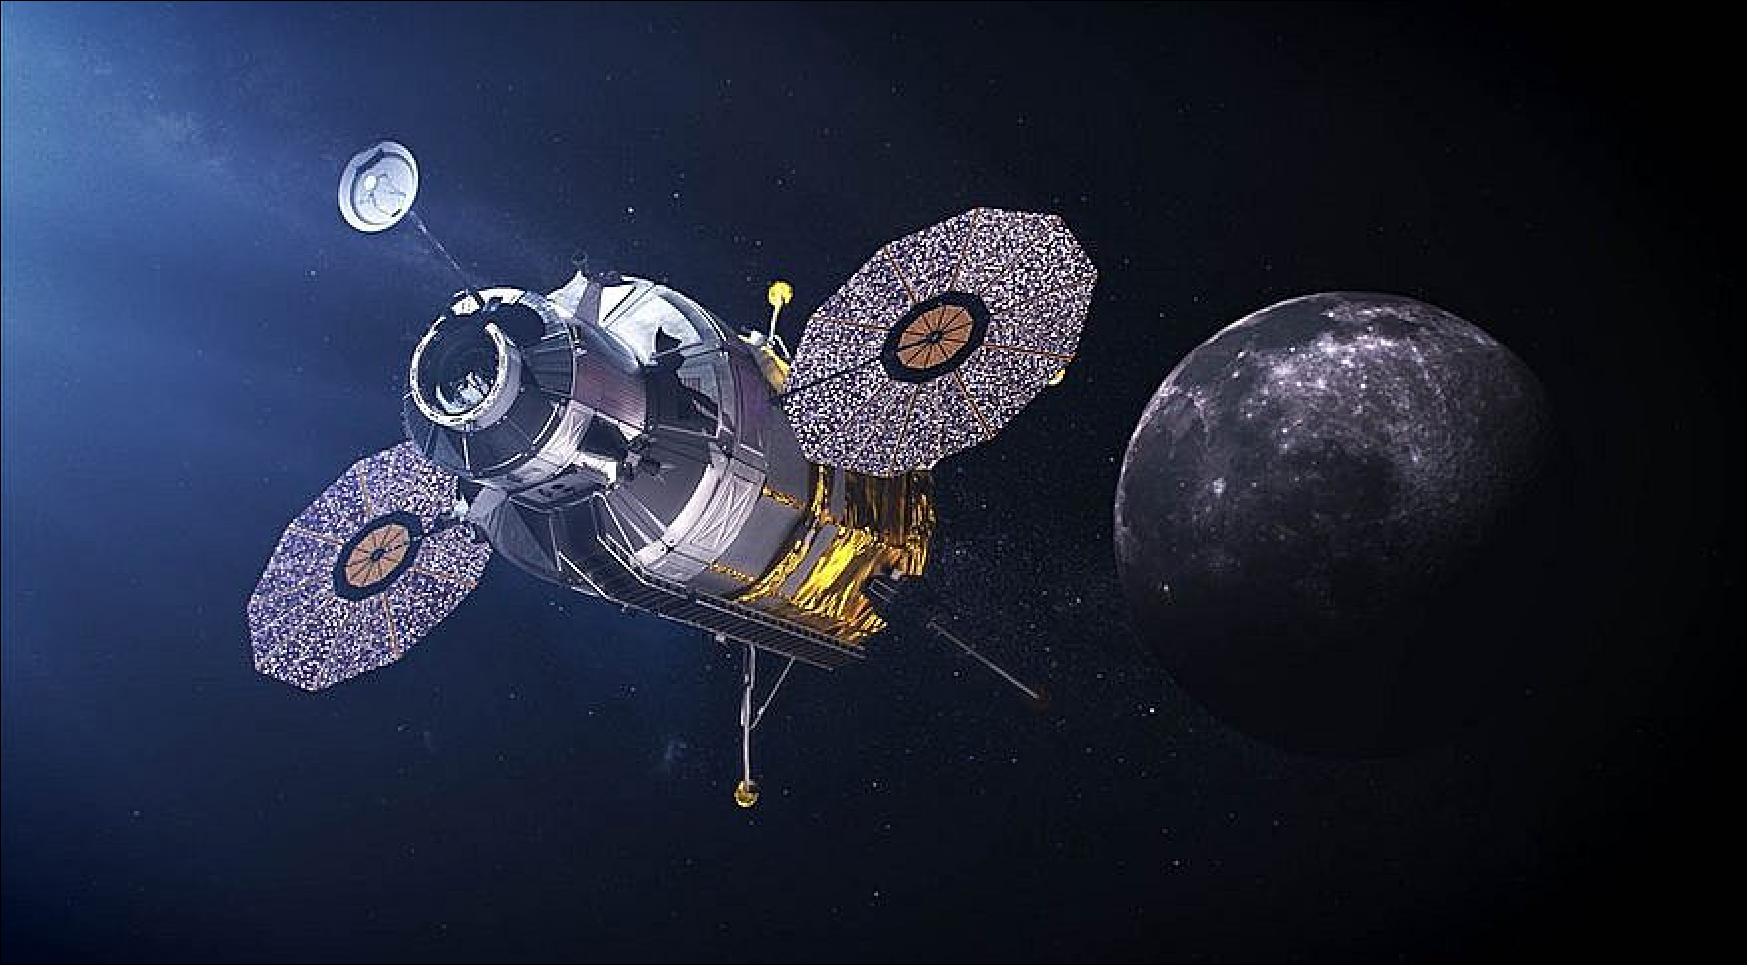 Figure 12: NASA is seeking proposals for studies and risk reduction work on crewed lunar landers, the first step in funding contracts for lunar lander services beyond the Artemis 3 mission (image credit: NASA)